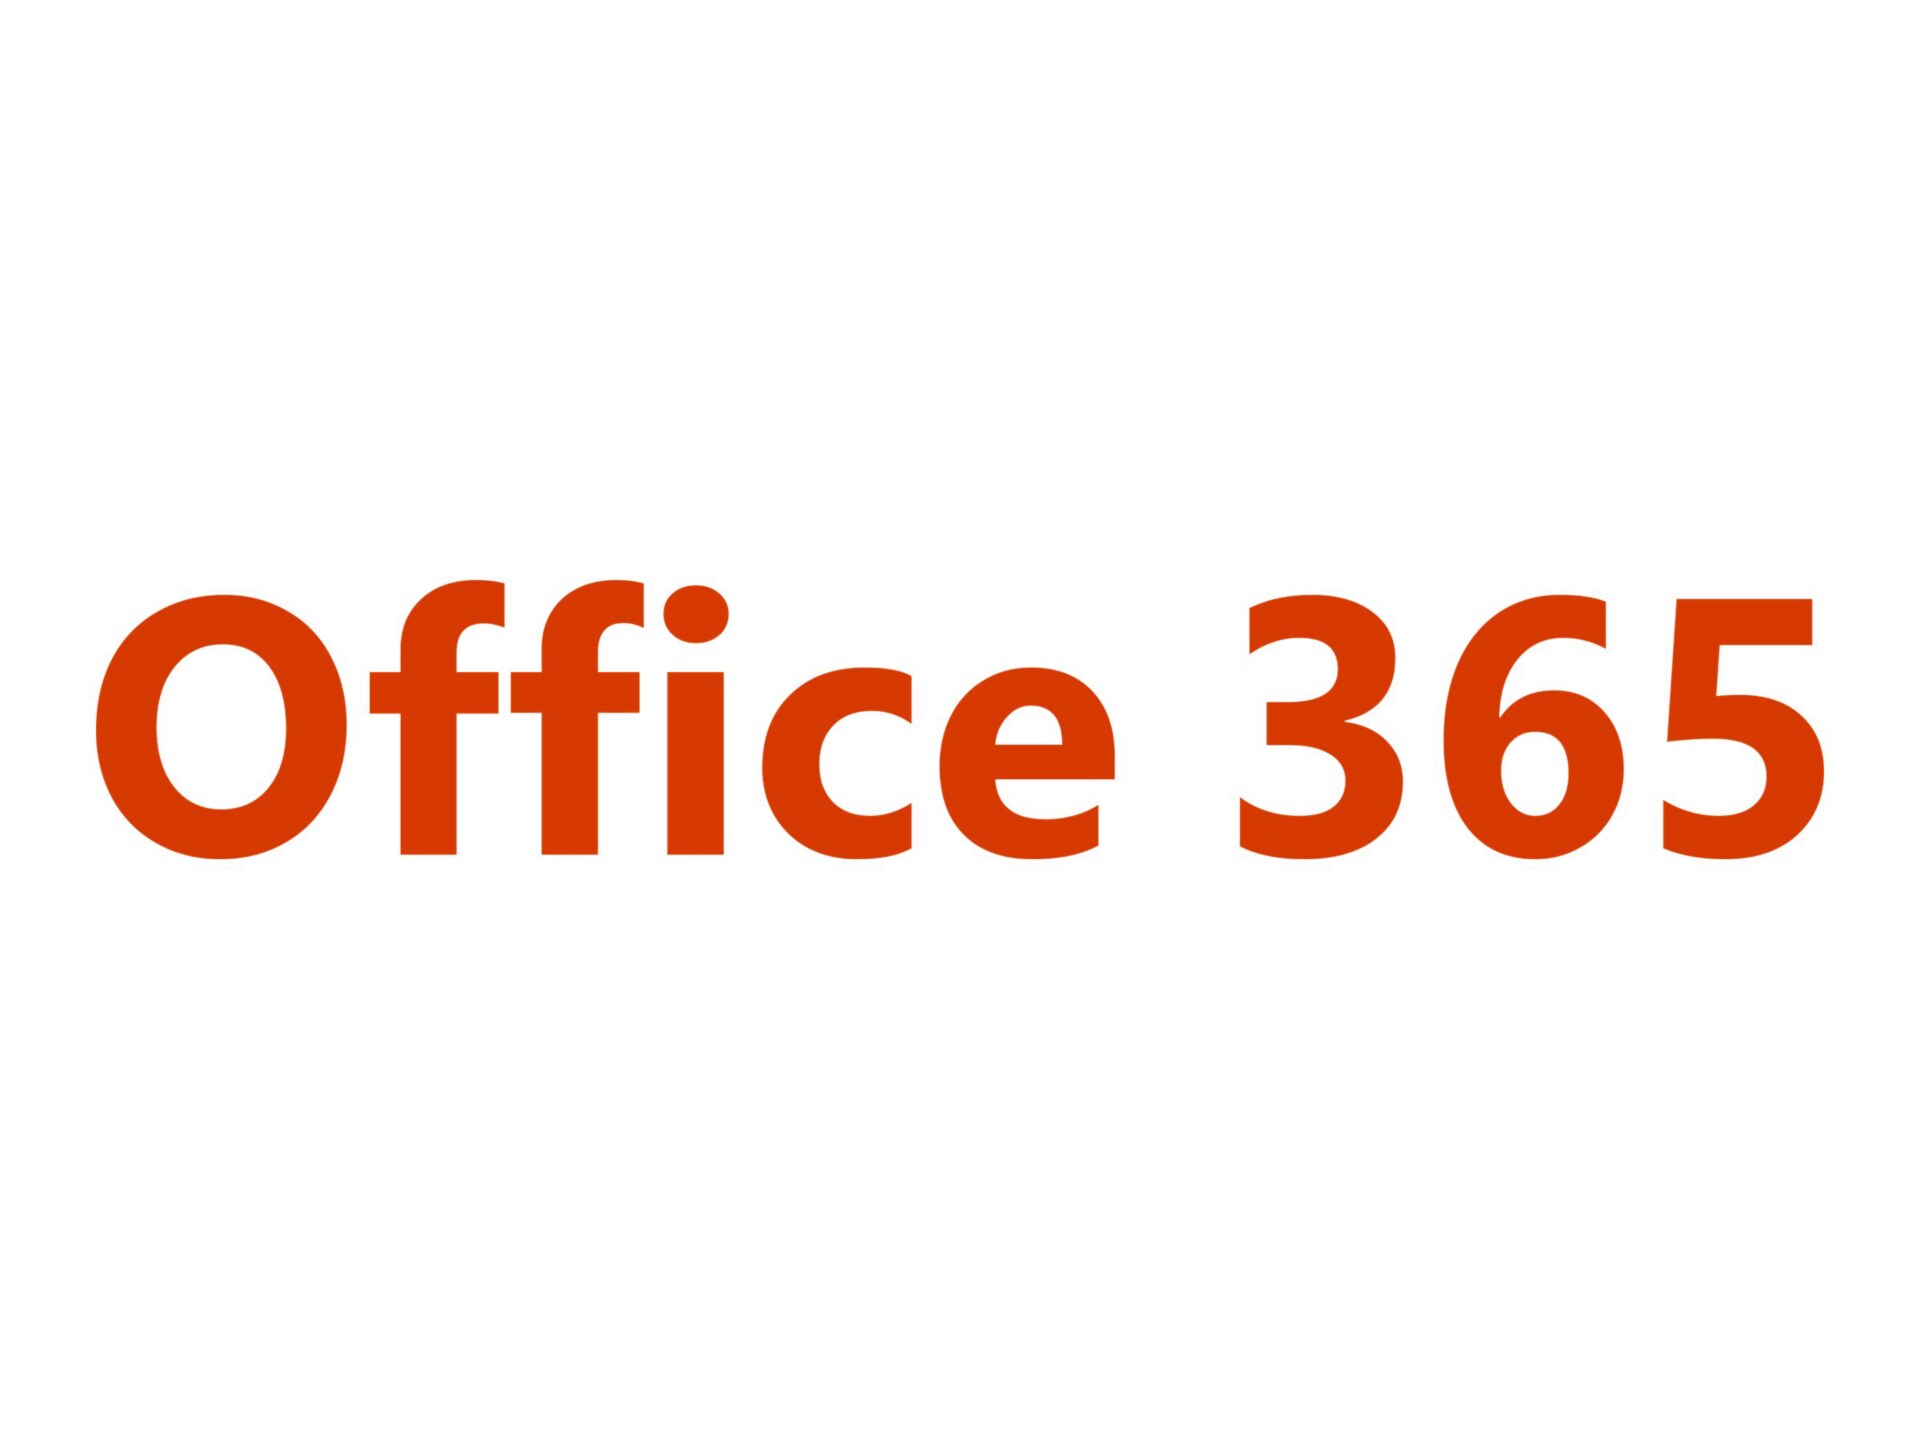 Microsoft Office 365 (Plan A5) without Audio Conferencing - subscription li